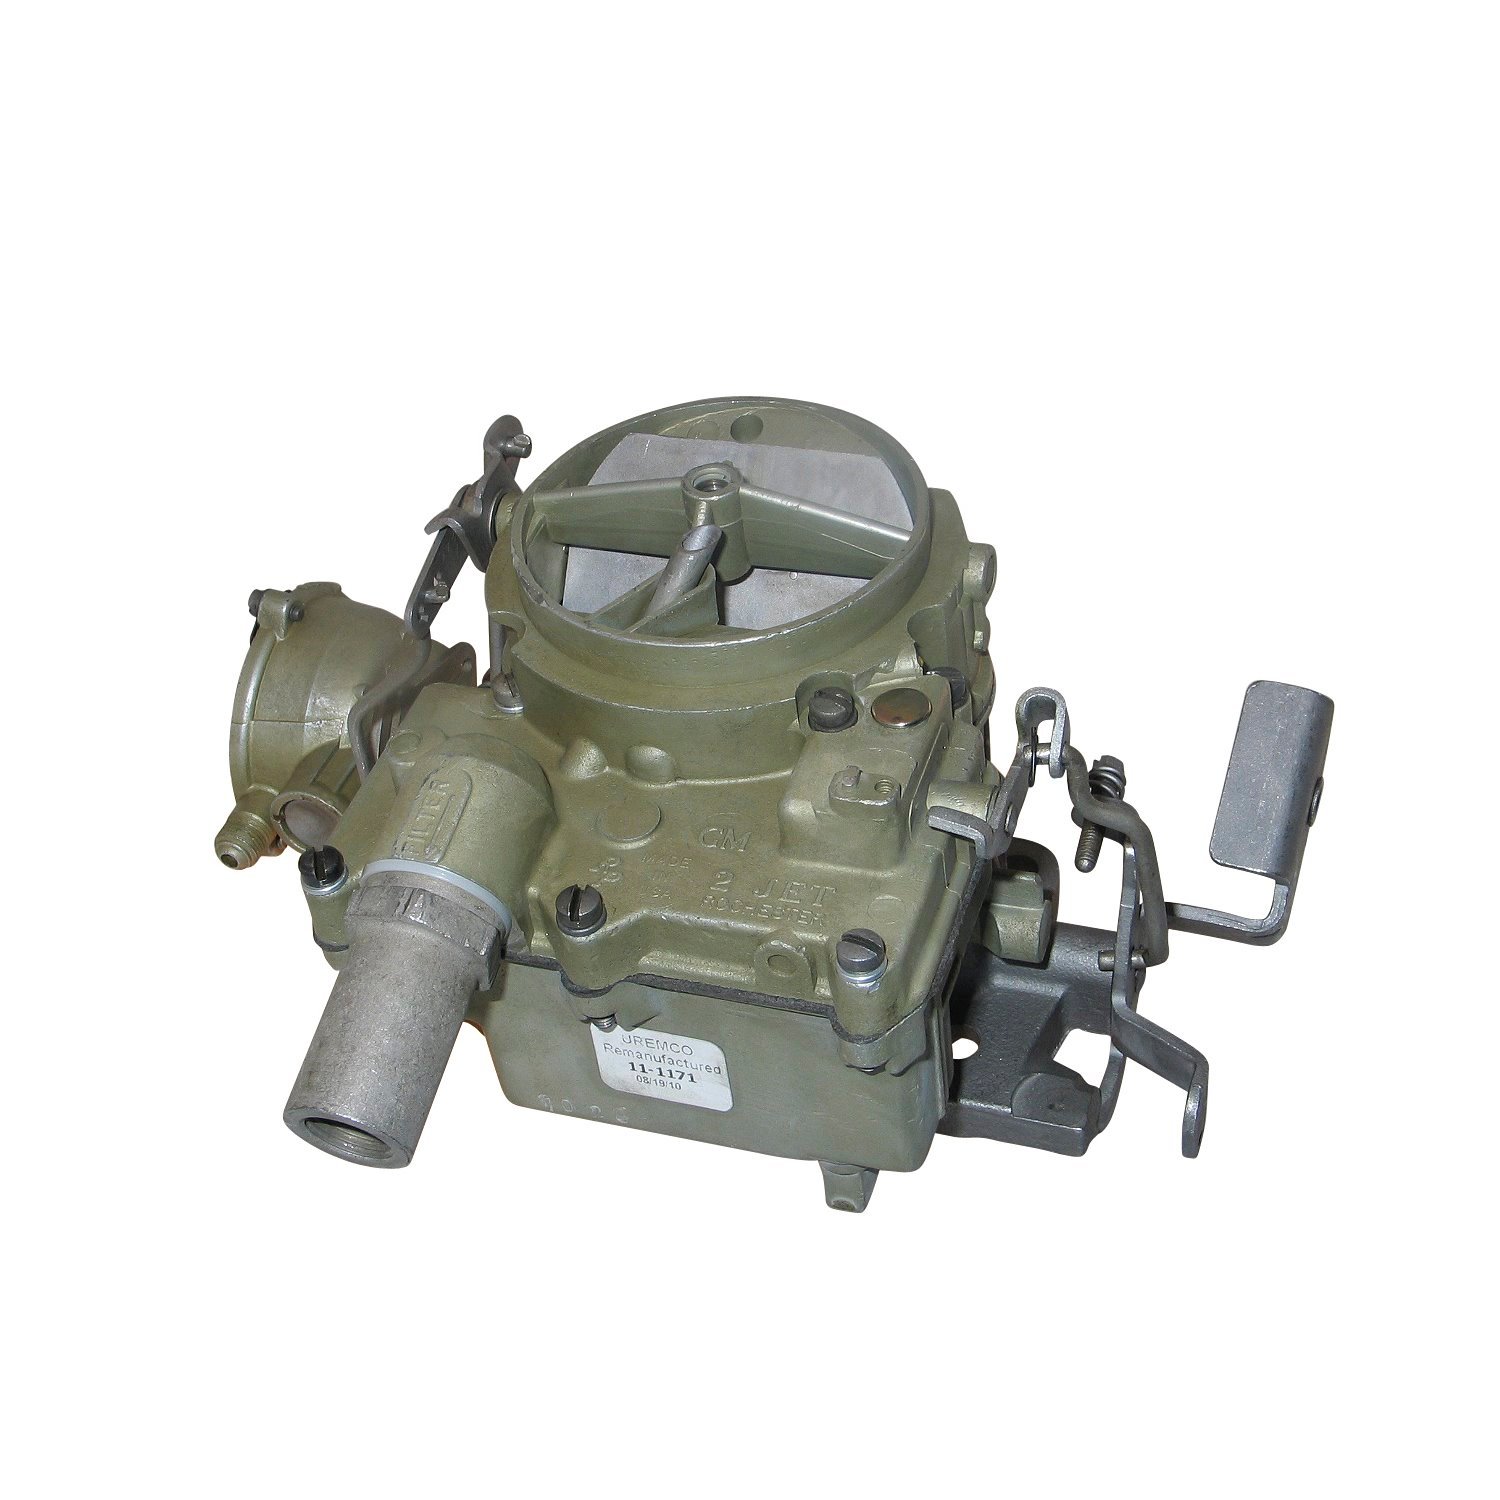 11-1171 Rochester Remanufactured Carburetor, 2GC-Style